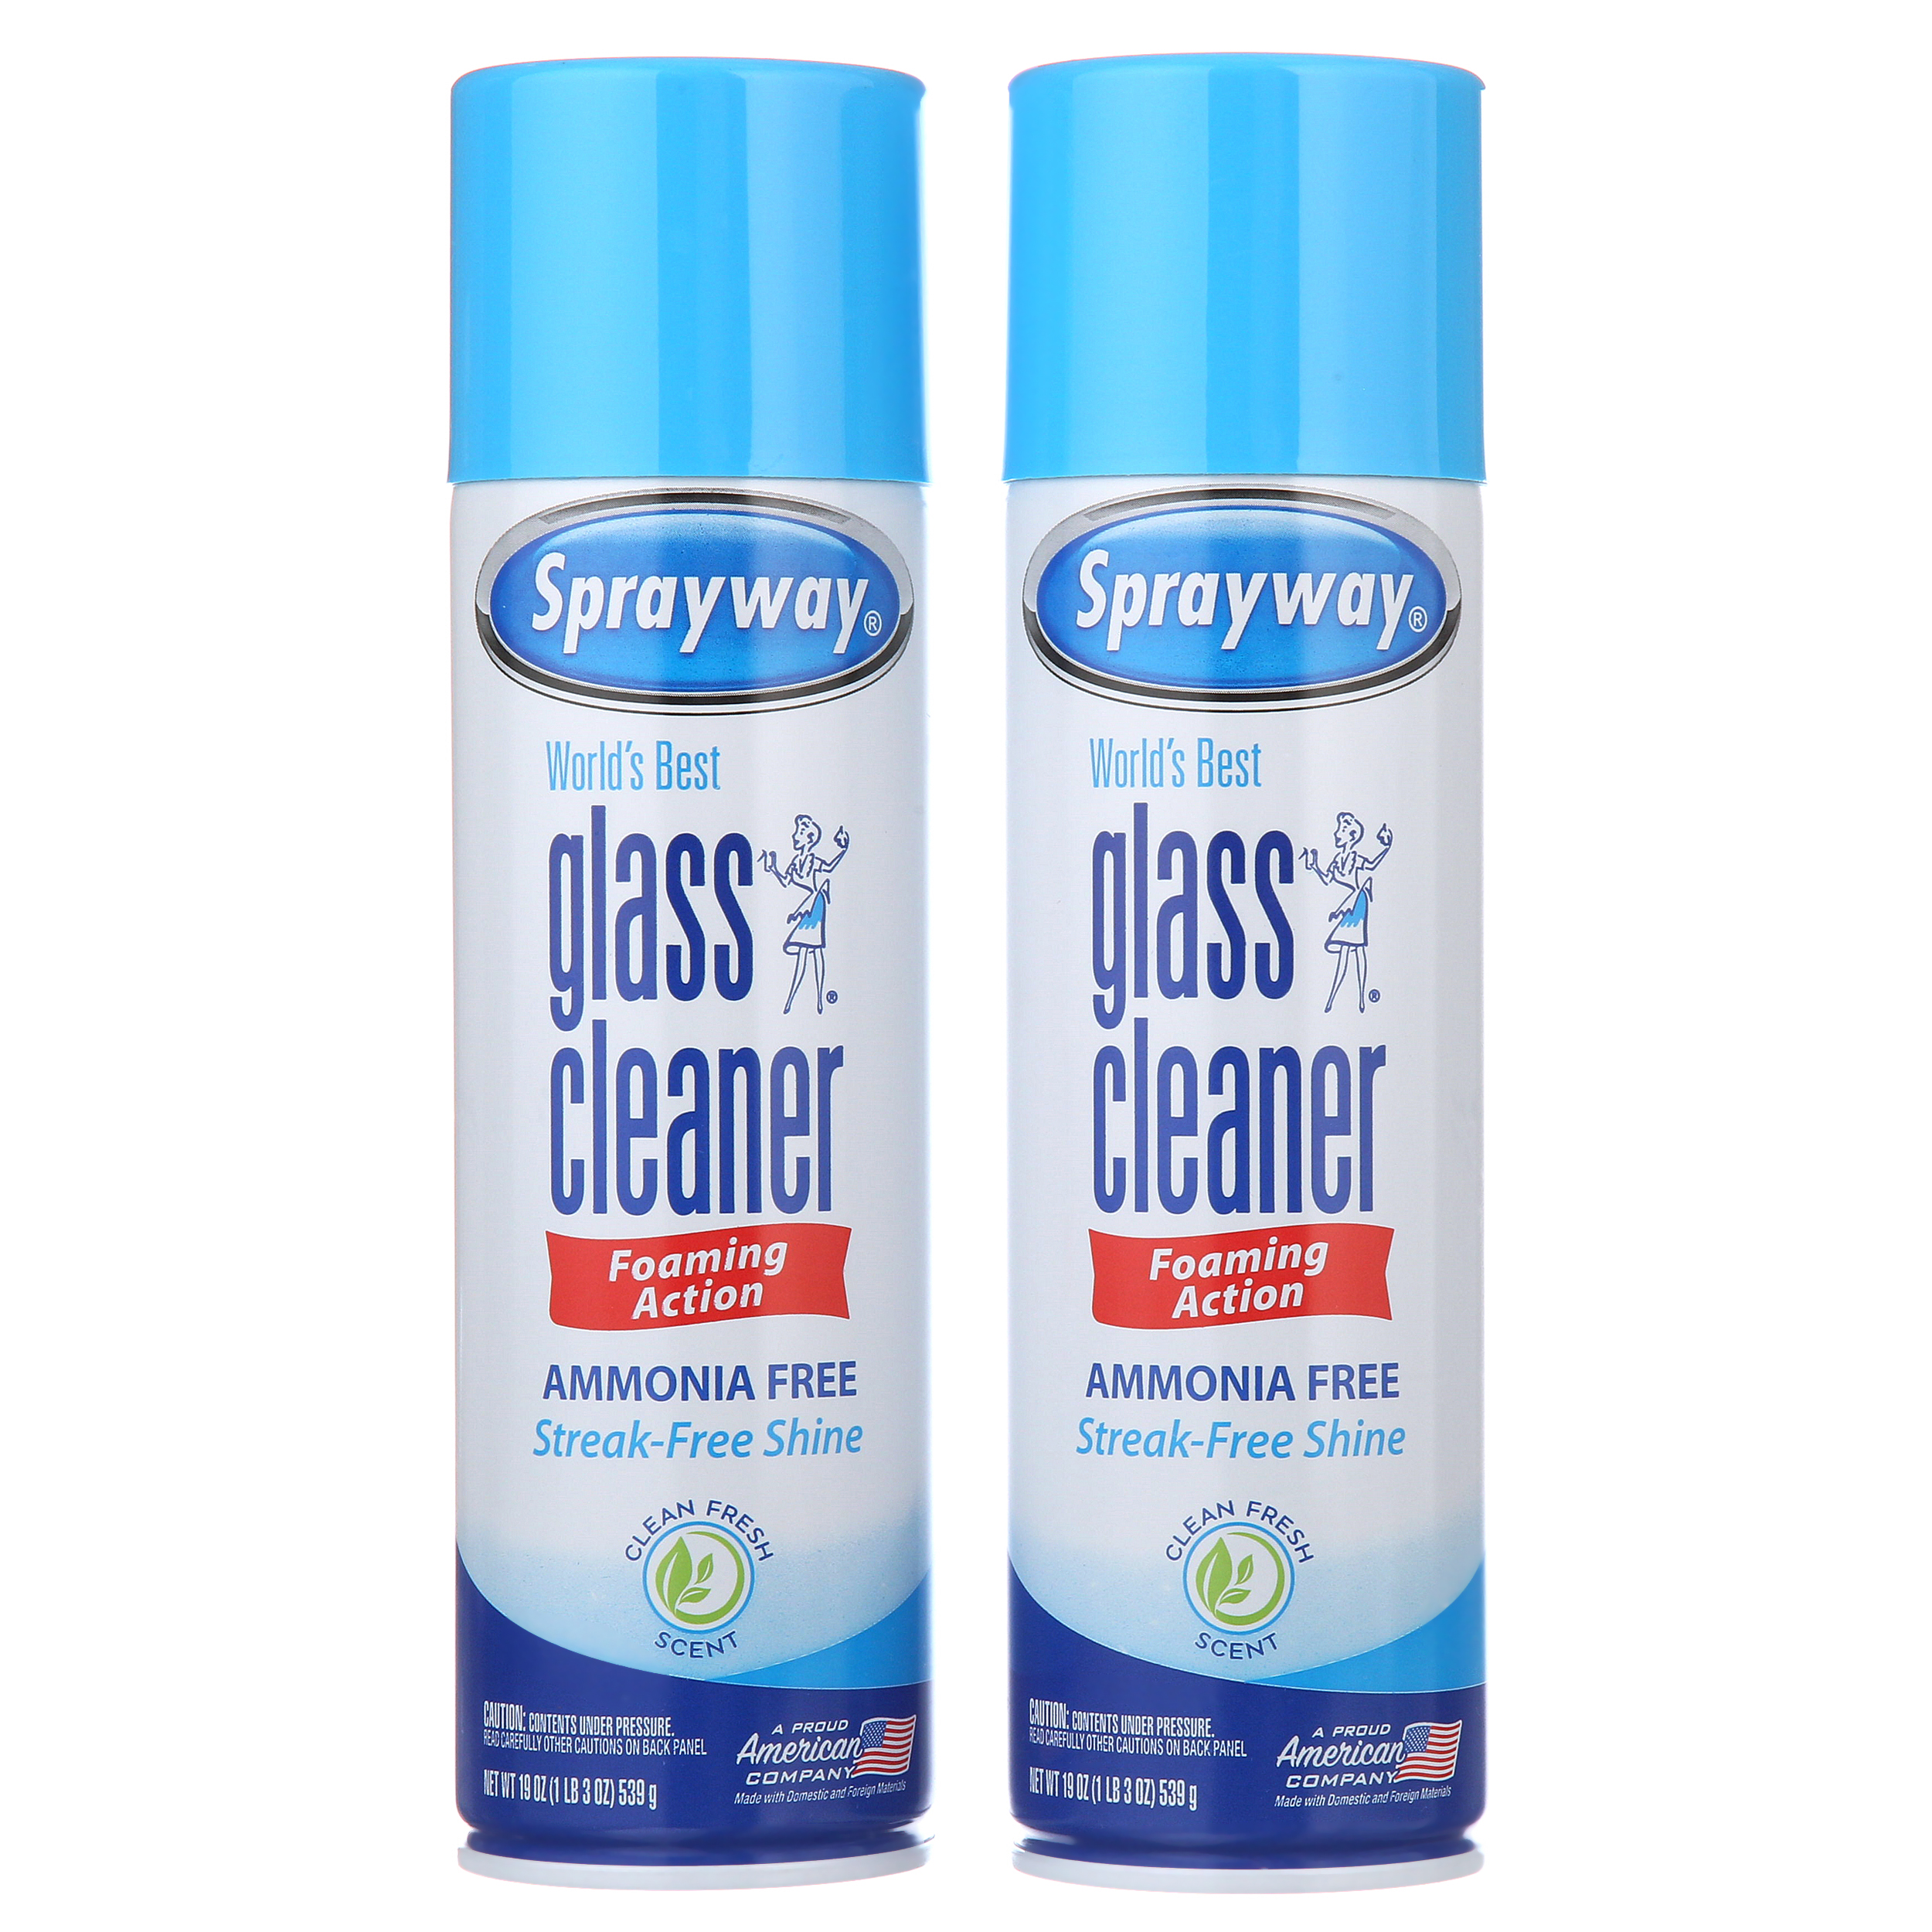 Autocar product test: What is the best glass cleaner?